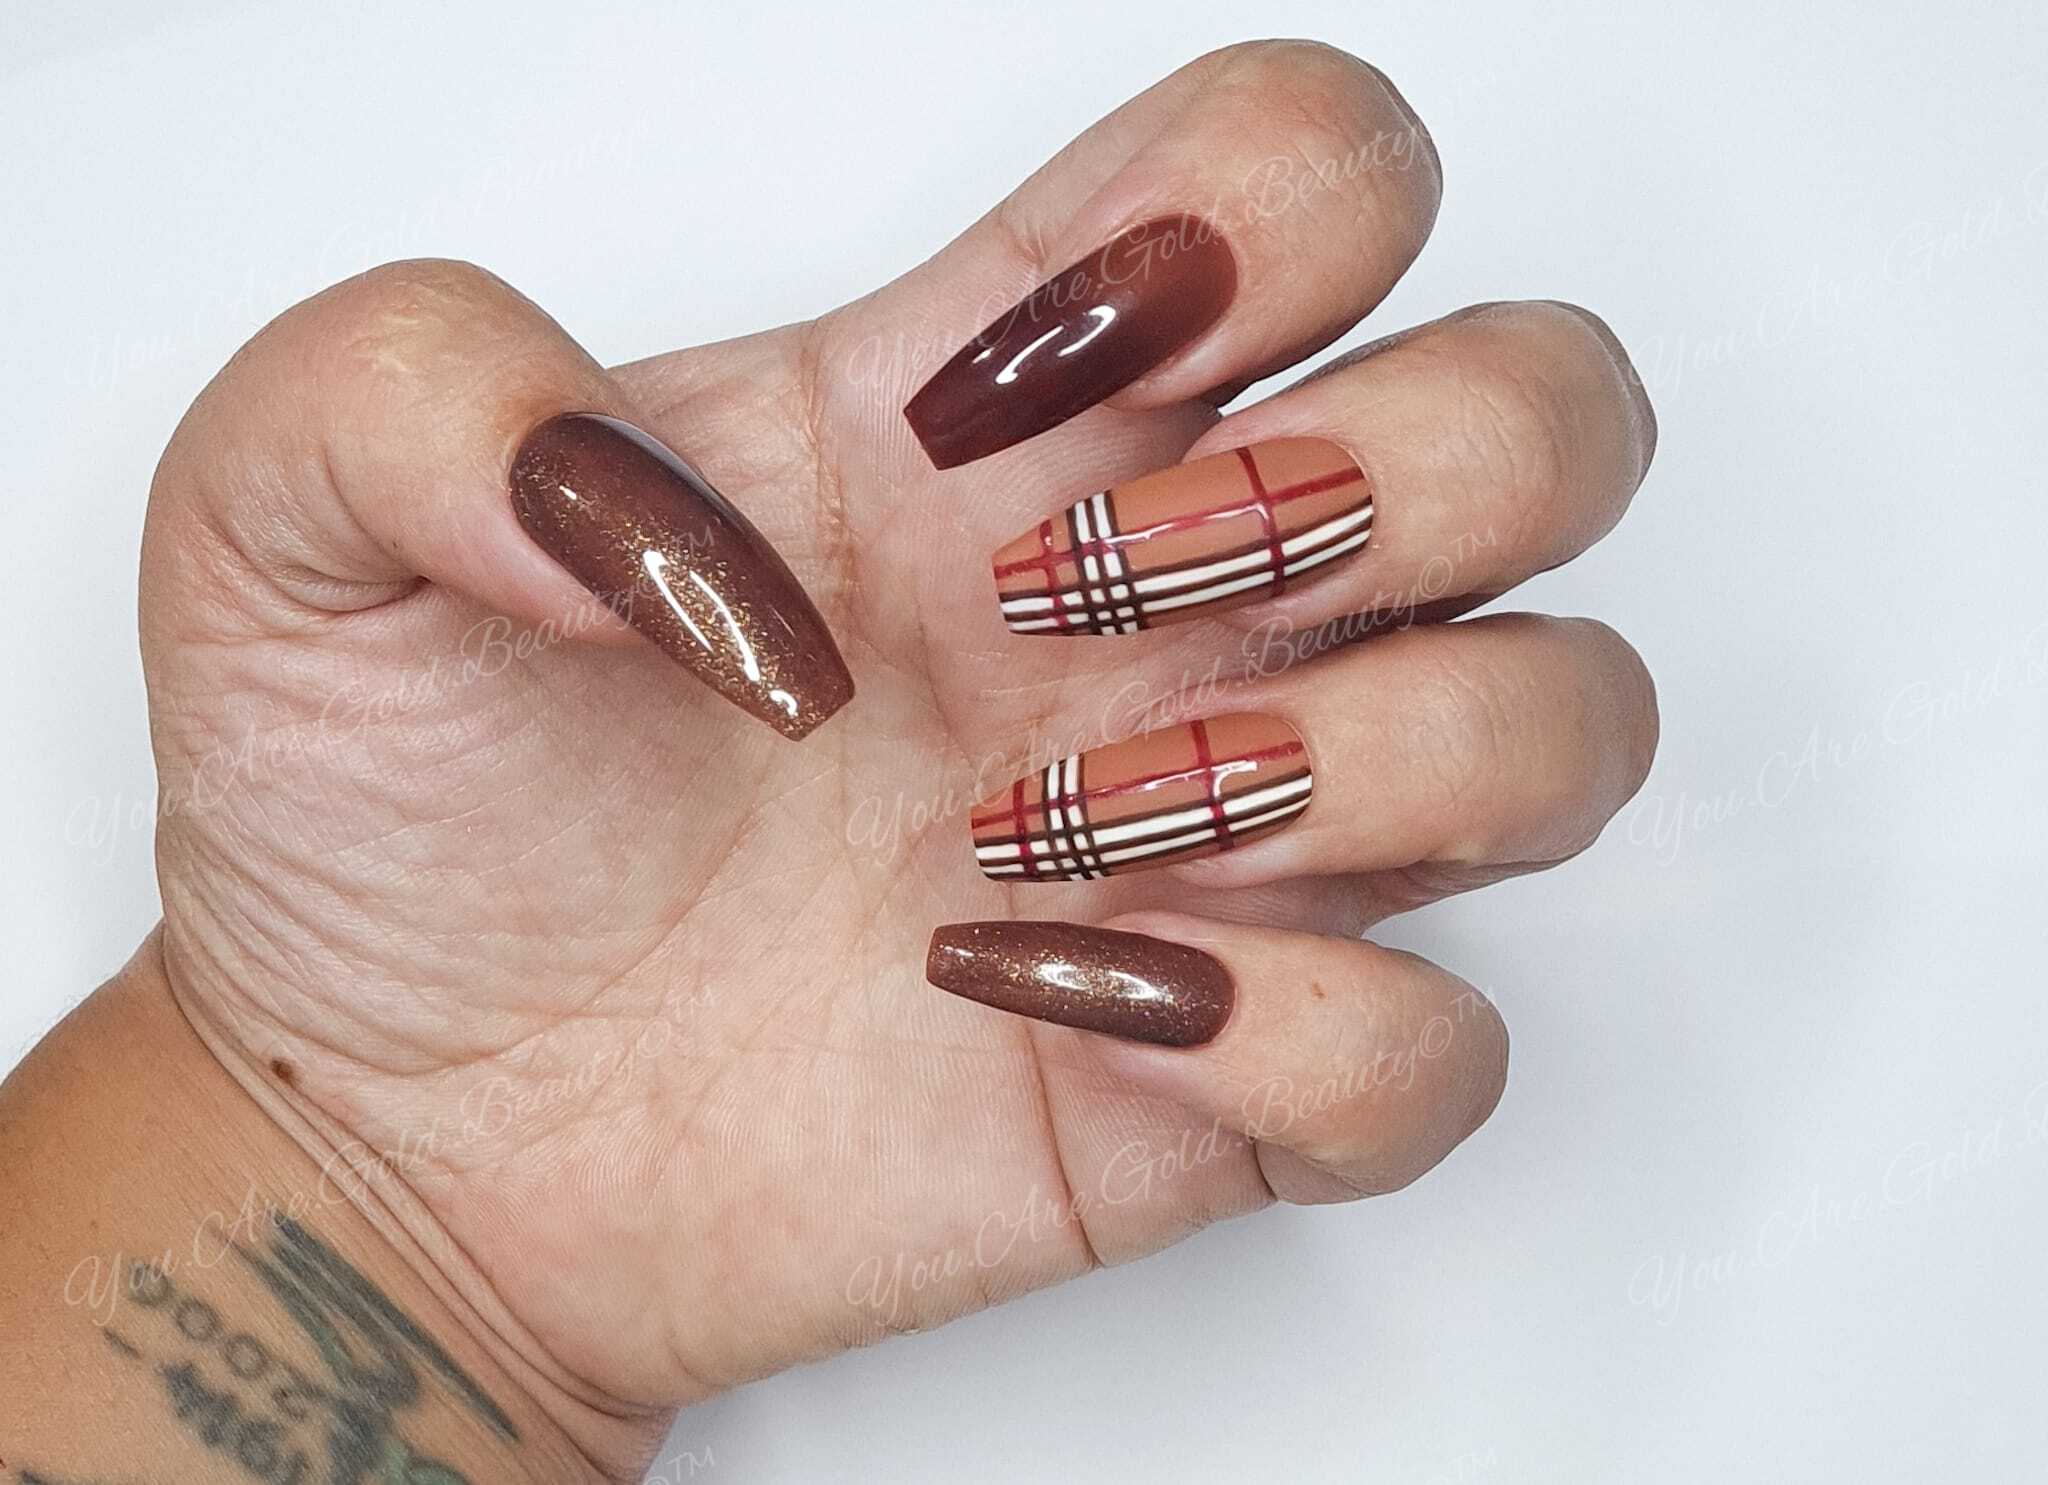 Burberry plaid nail art design: Striping tape manicure tutorial for  beginners - Cosmetopia Digest Beauty and Makeup Blog